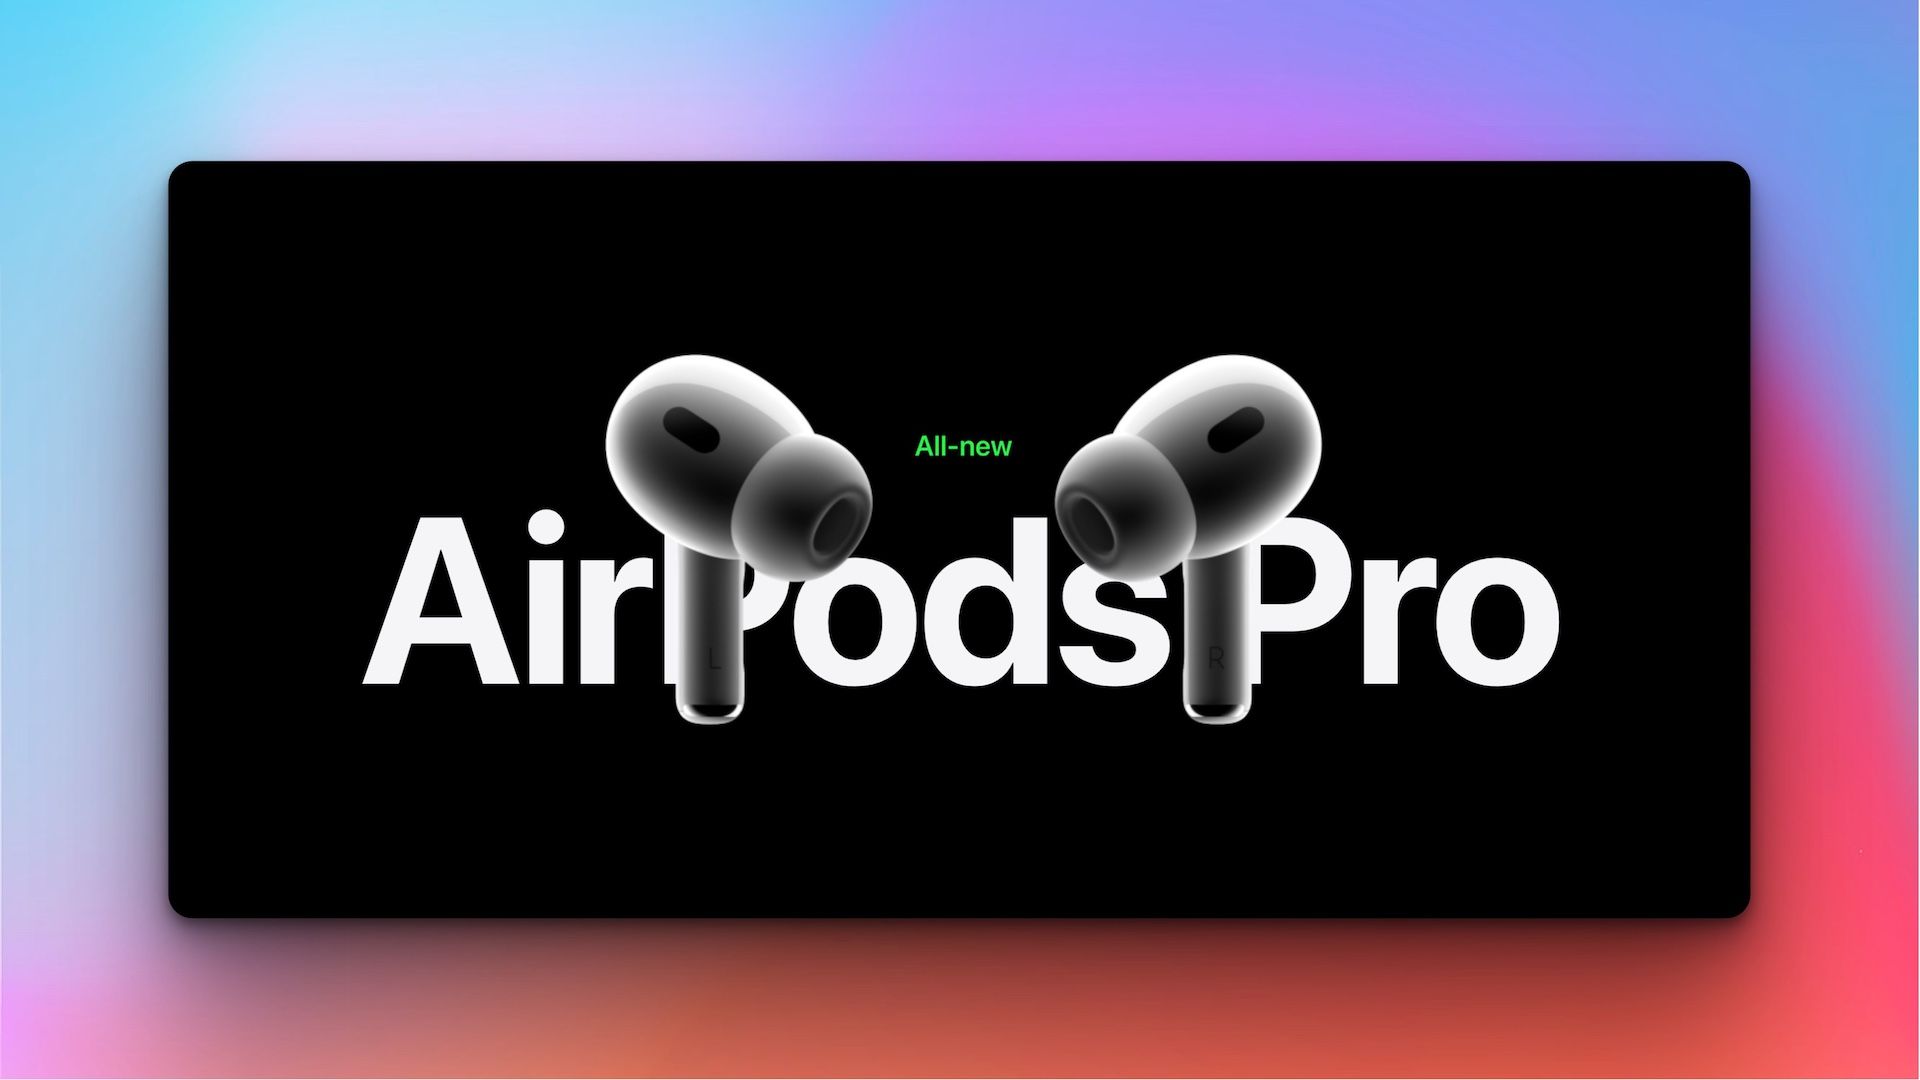 10 Best accessories for AirPods Pro 2 (2nd Generation)